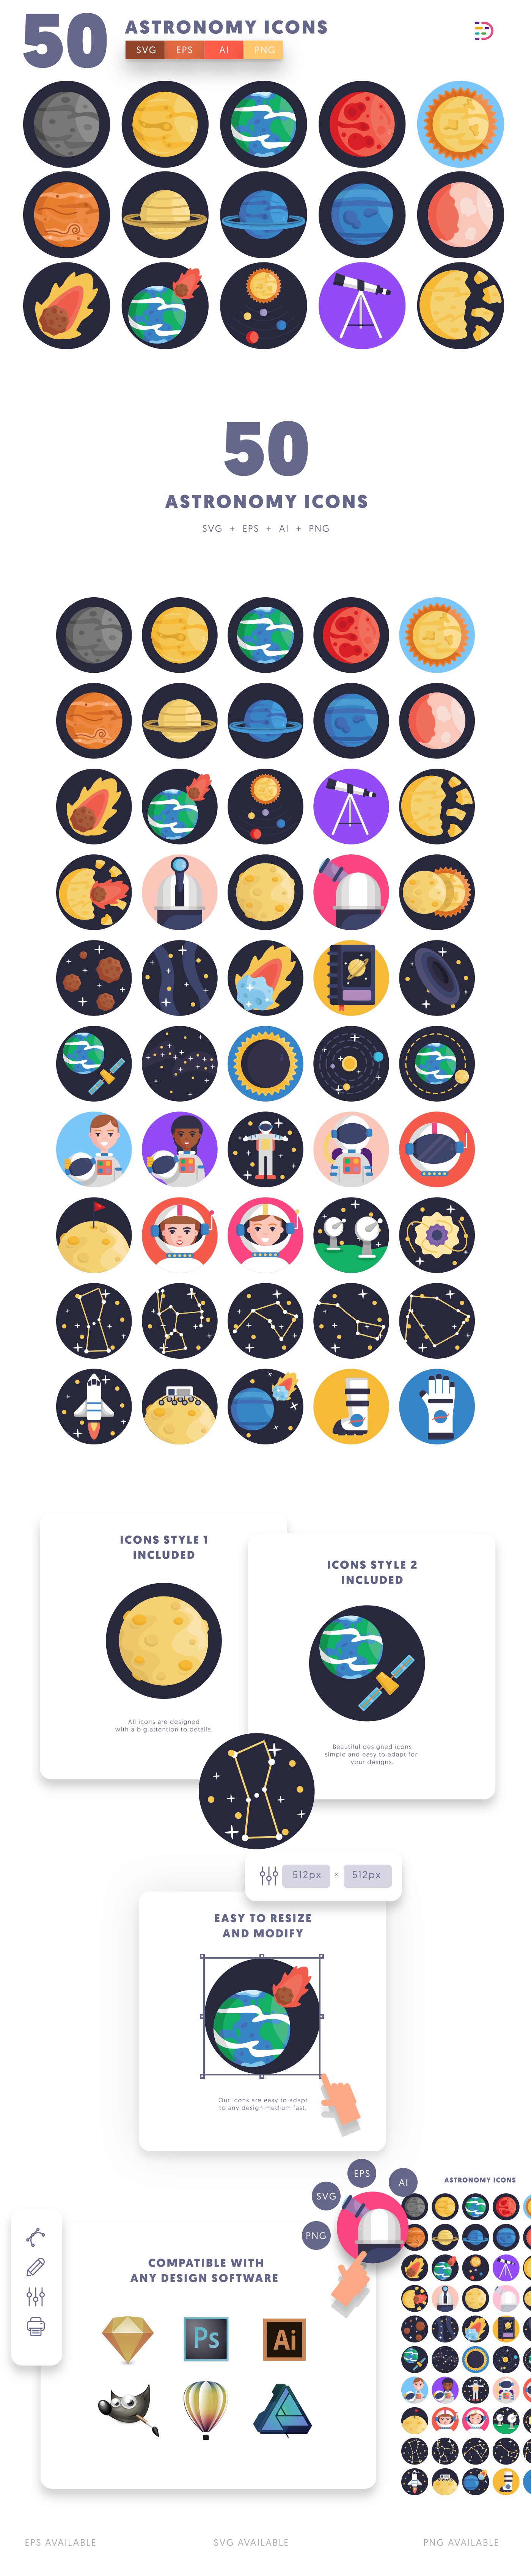 50 Astronomy Icons cover image.